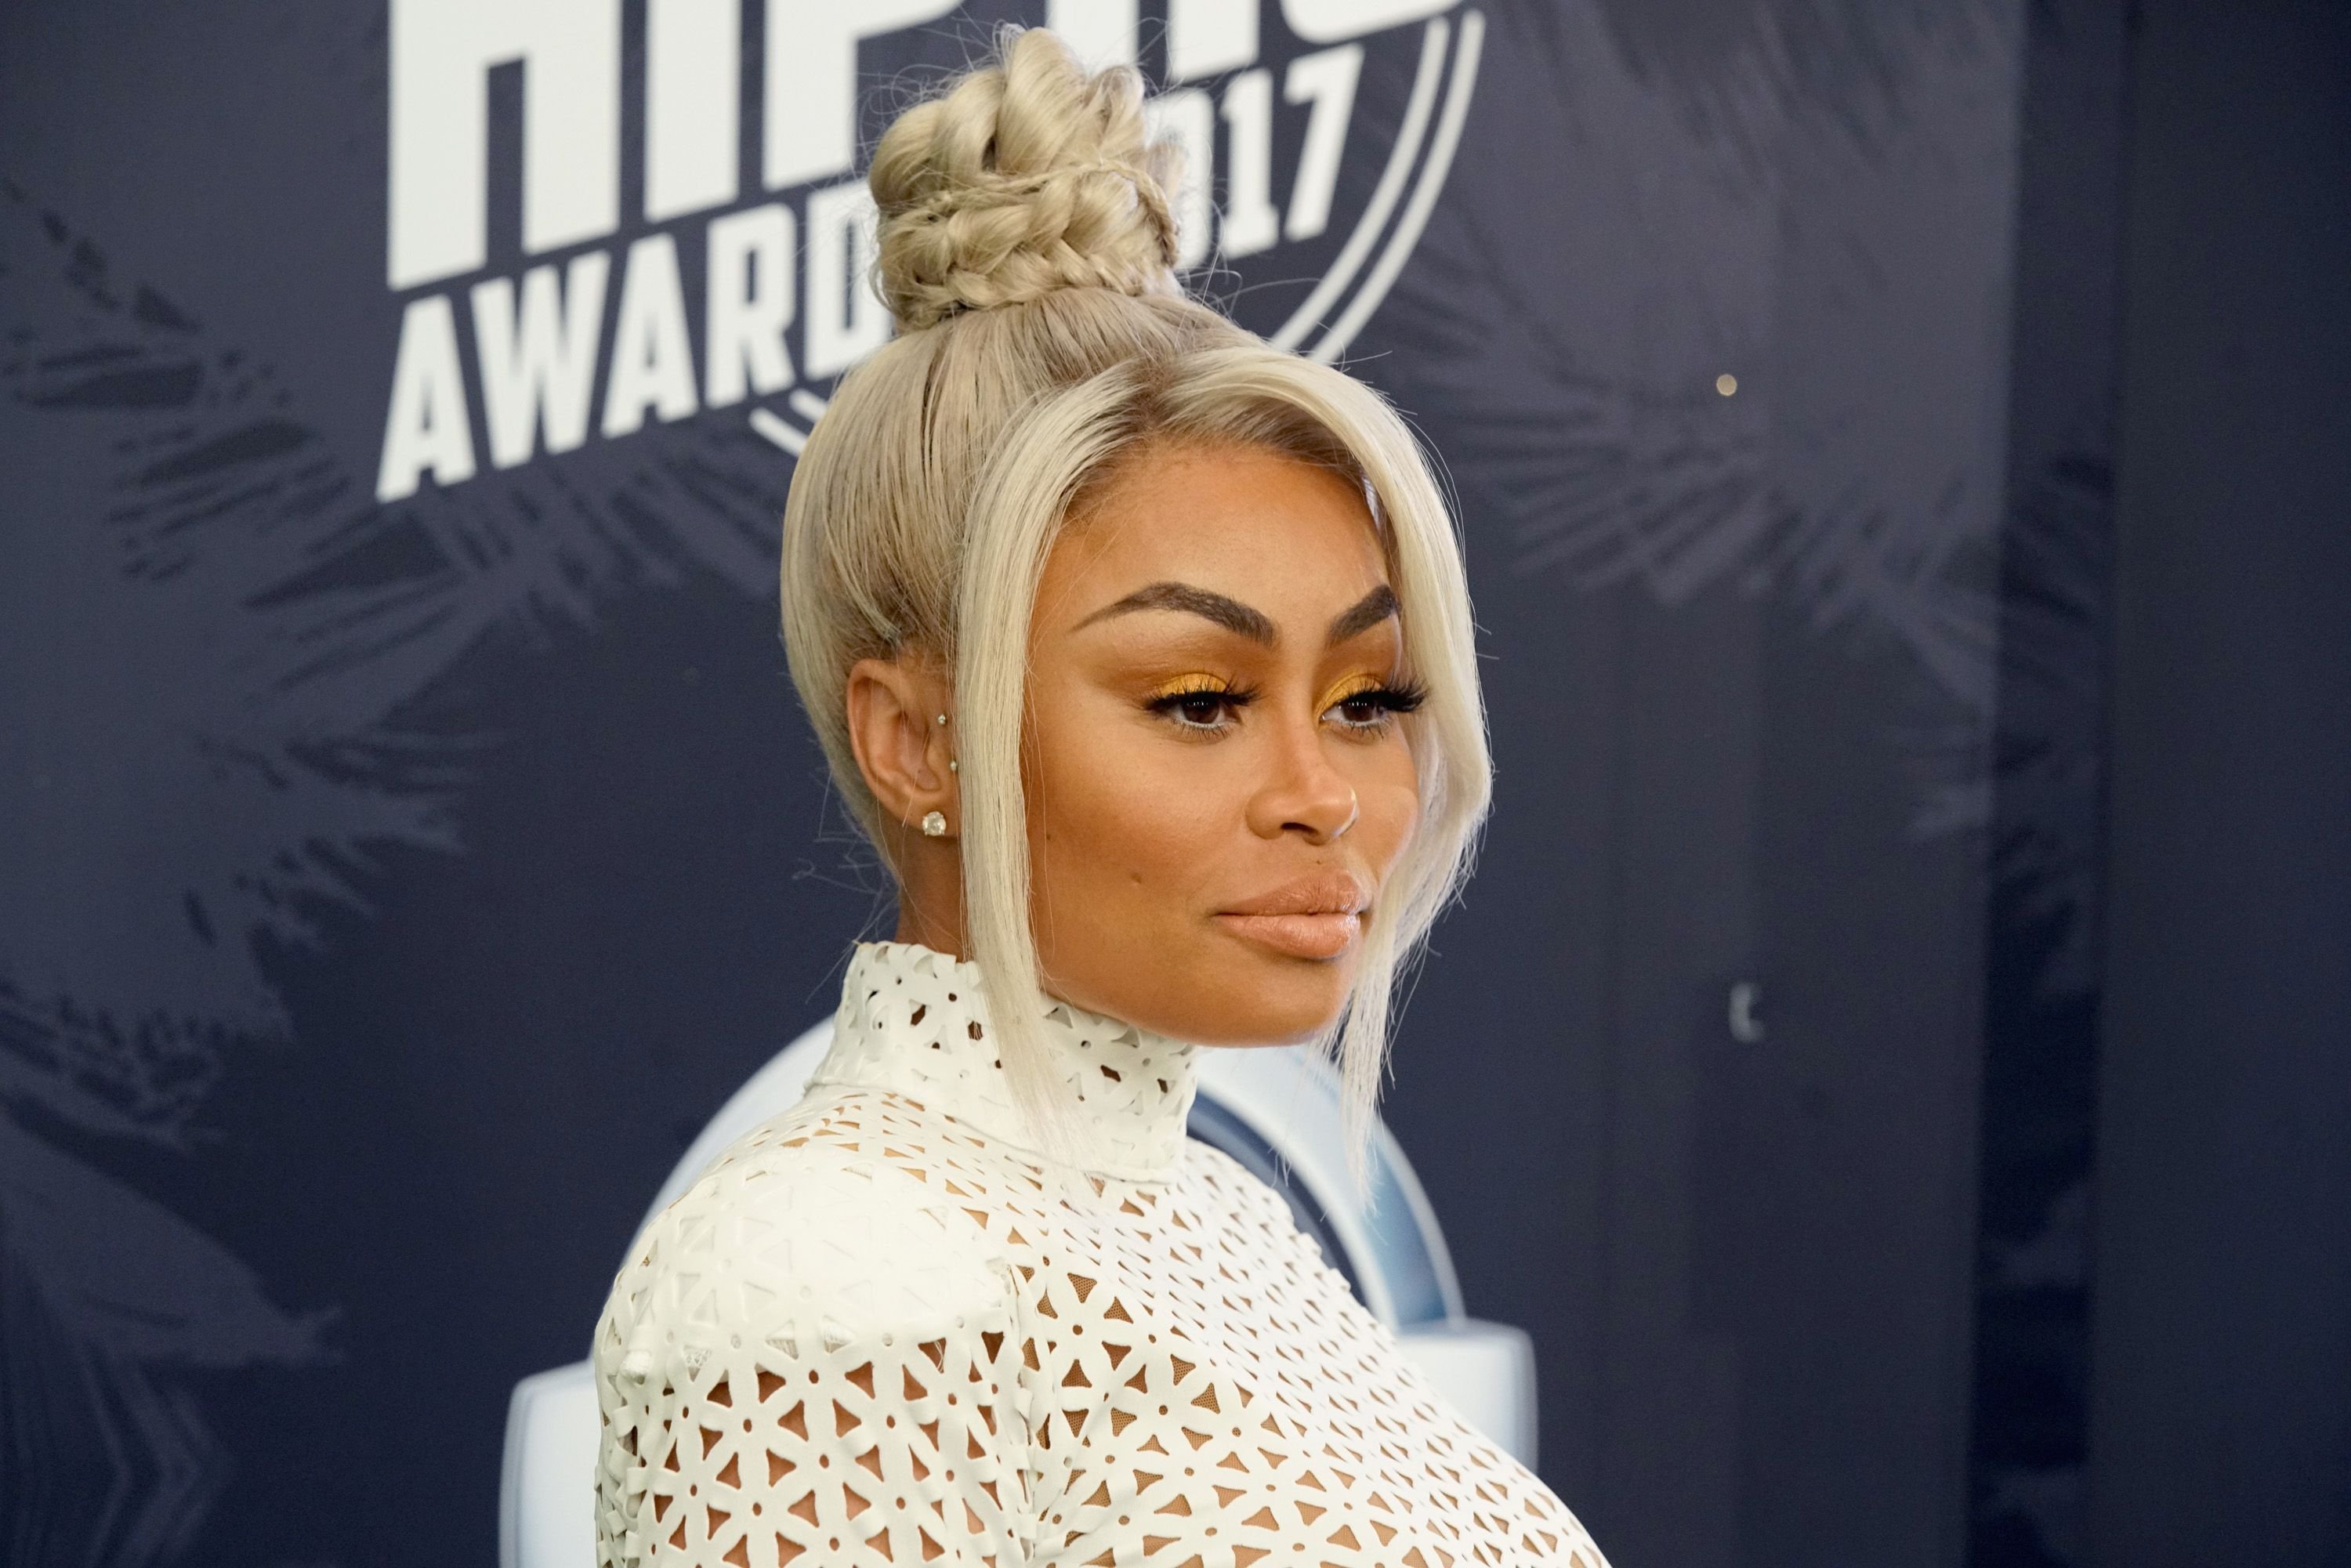 Reality star and entrepreneur Blac Chyna attends the 2017 BET Hip Hop Awards in Miami, Florida. | Source: Getty Images